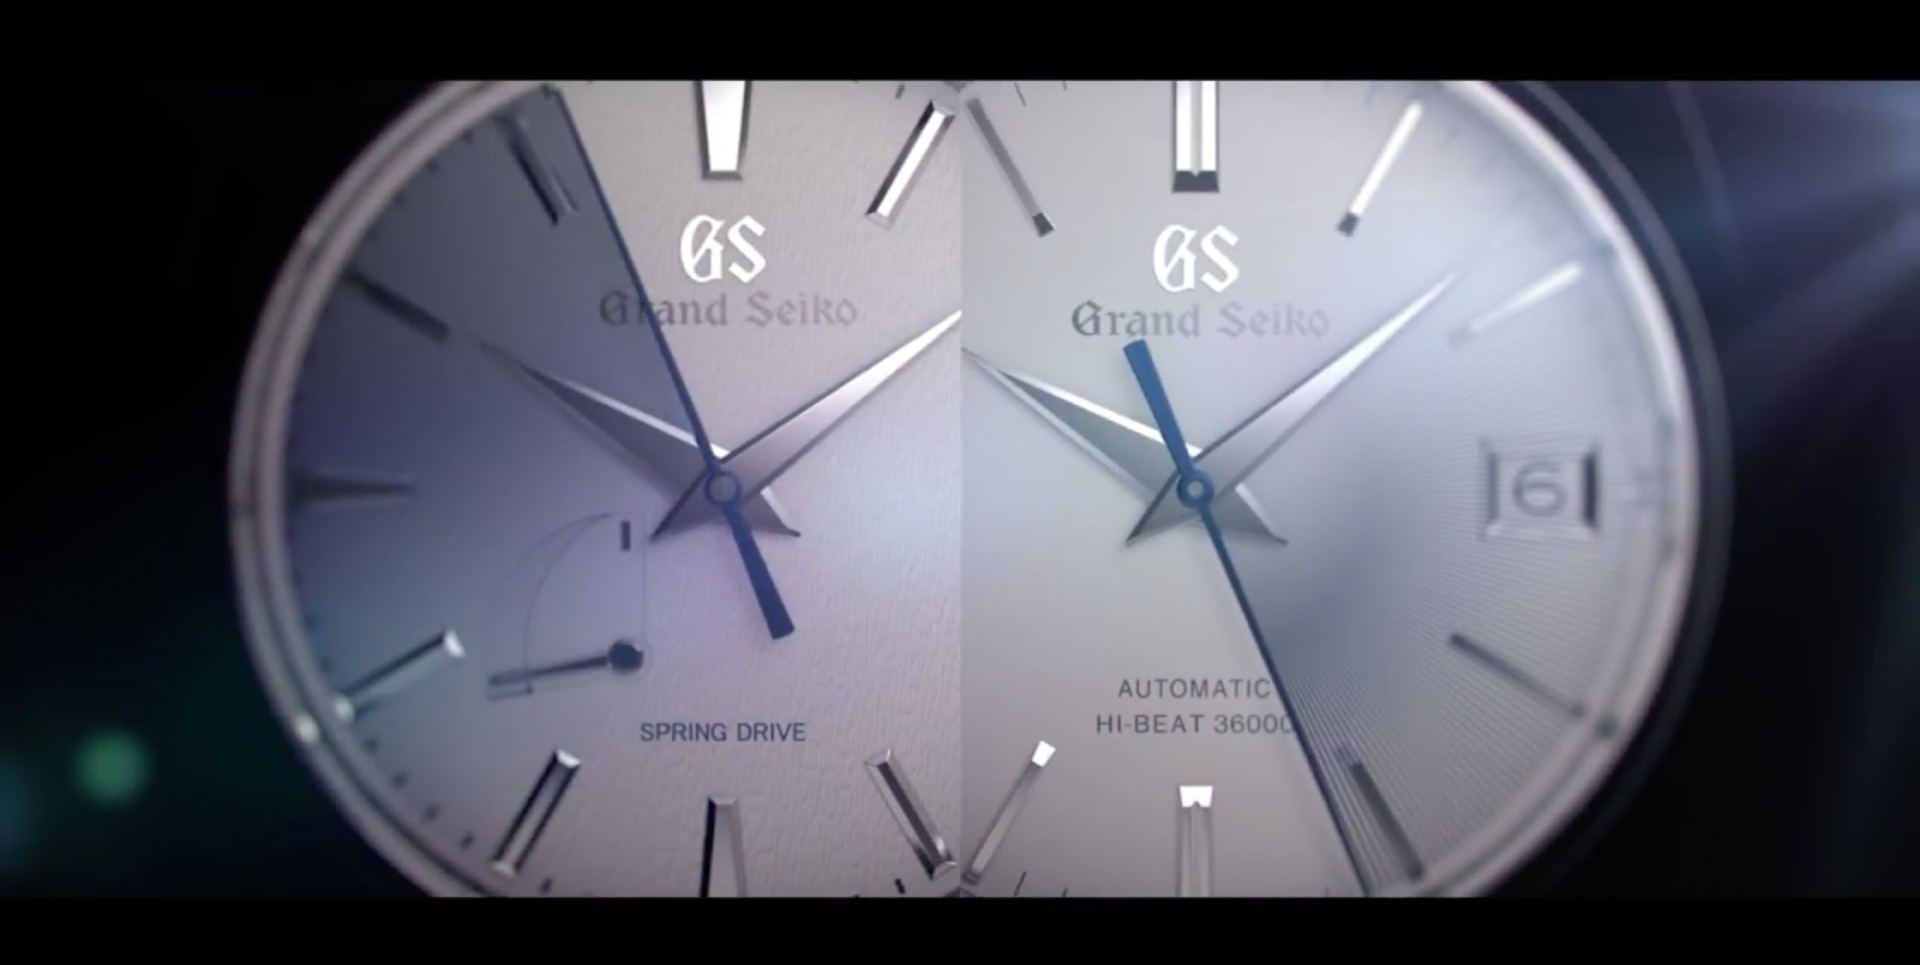 Time reimagined through Grand Seiko's installation project | The Japan Times